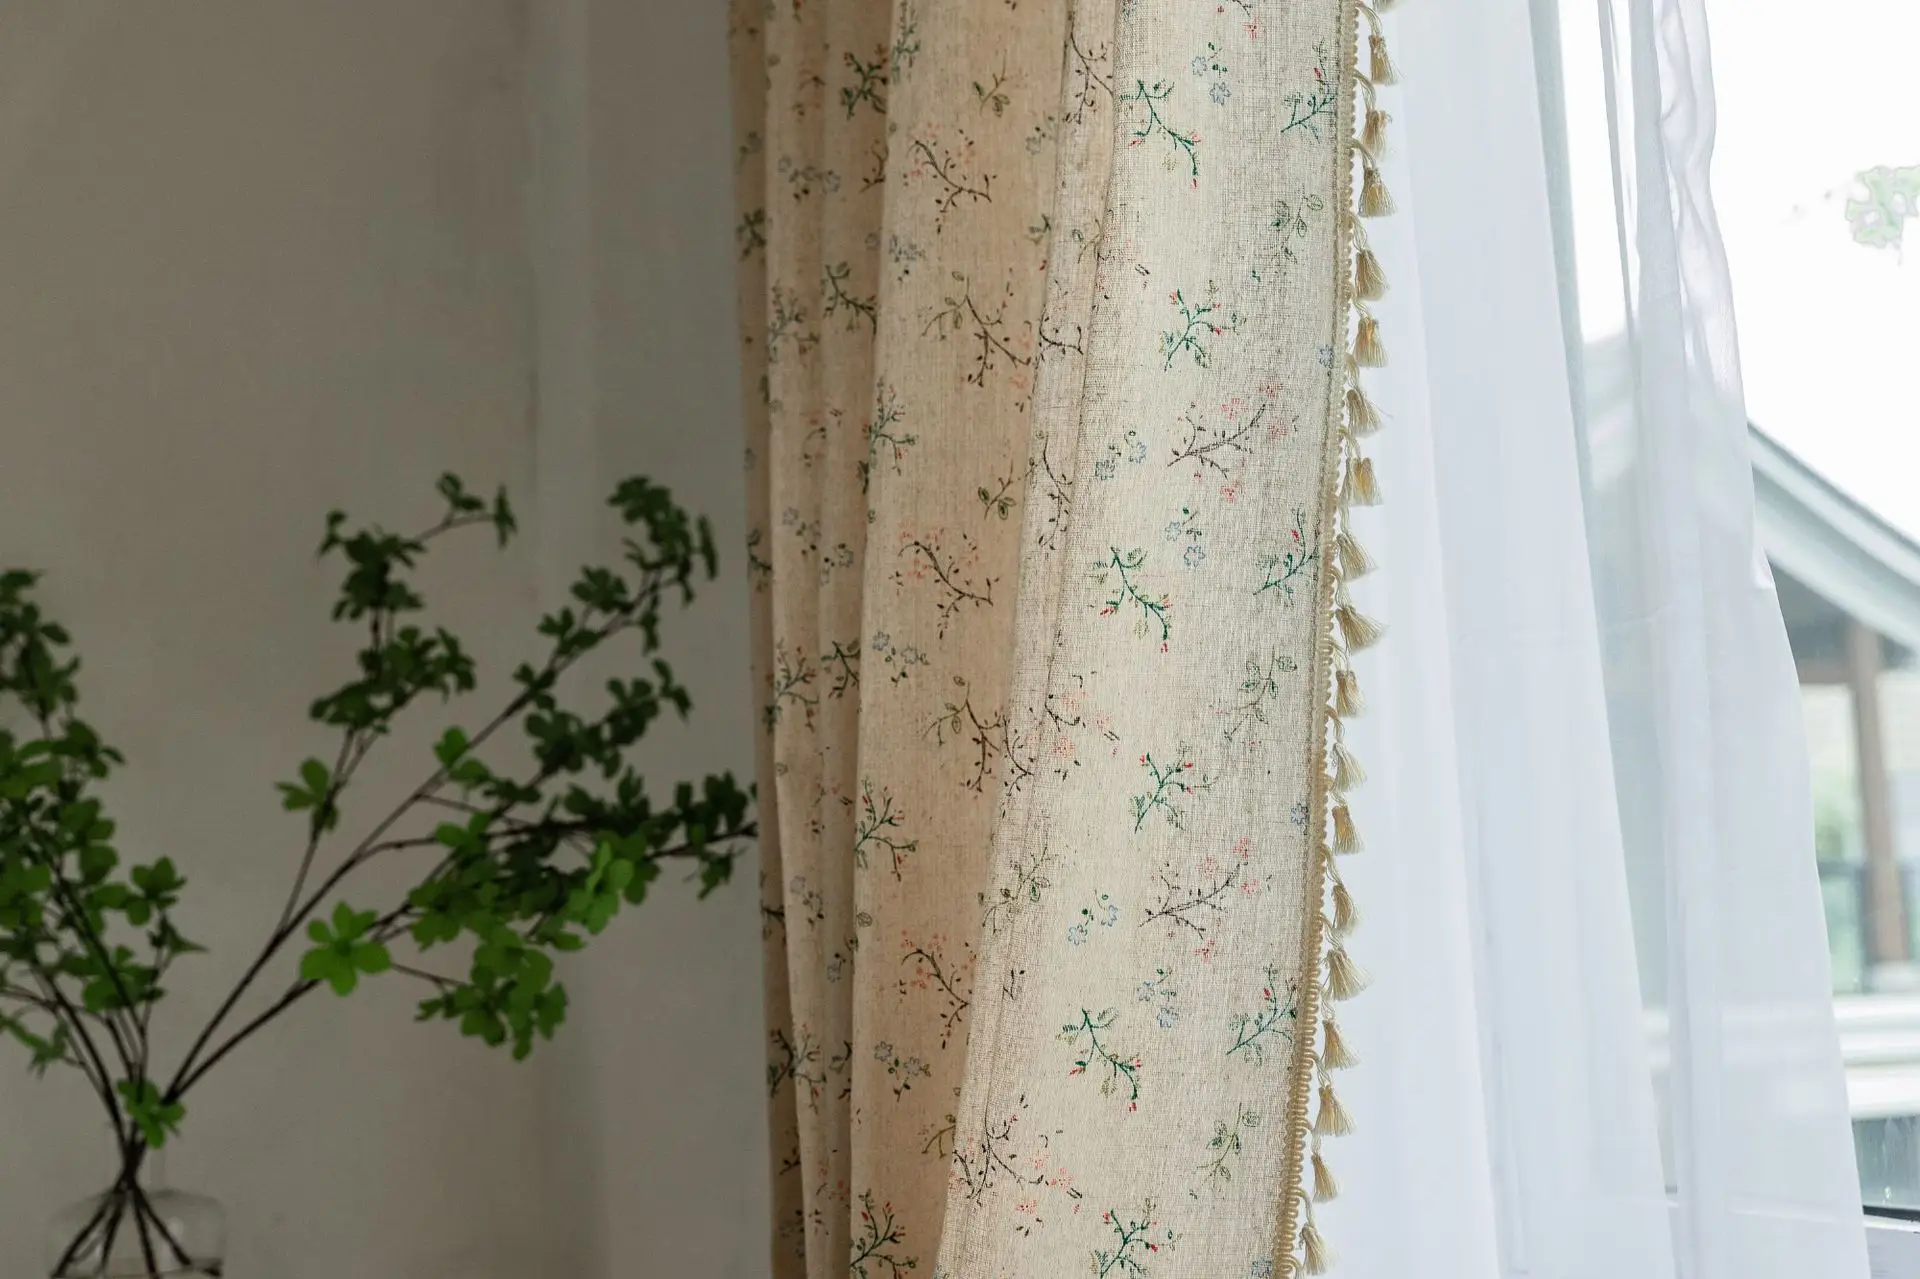 North American Curtains for Living Room Bedroom Small Window Kitchen Half Curtain Tassel Cotton Linen Half Blackout Bay Window